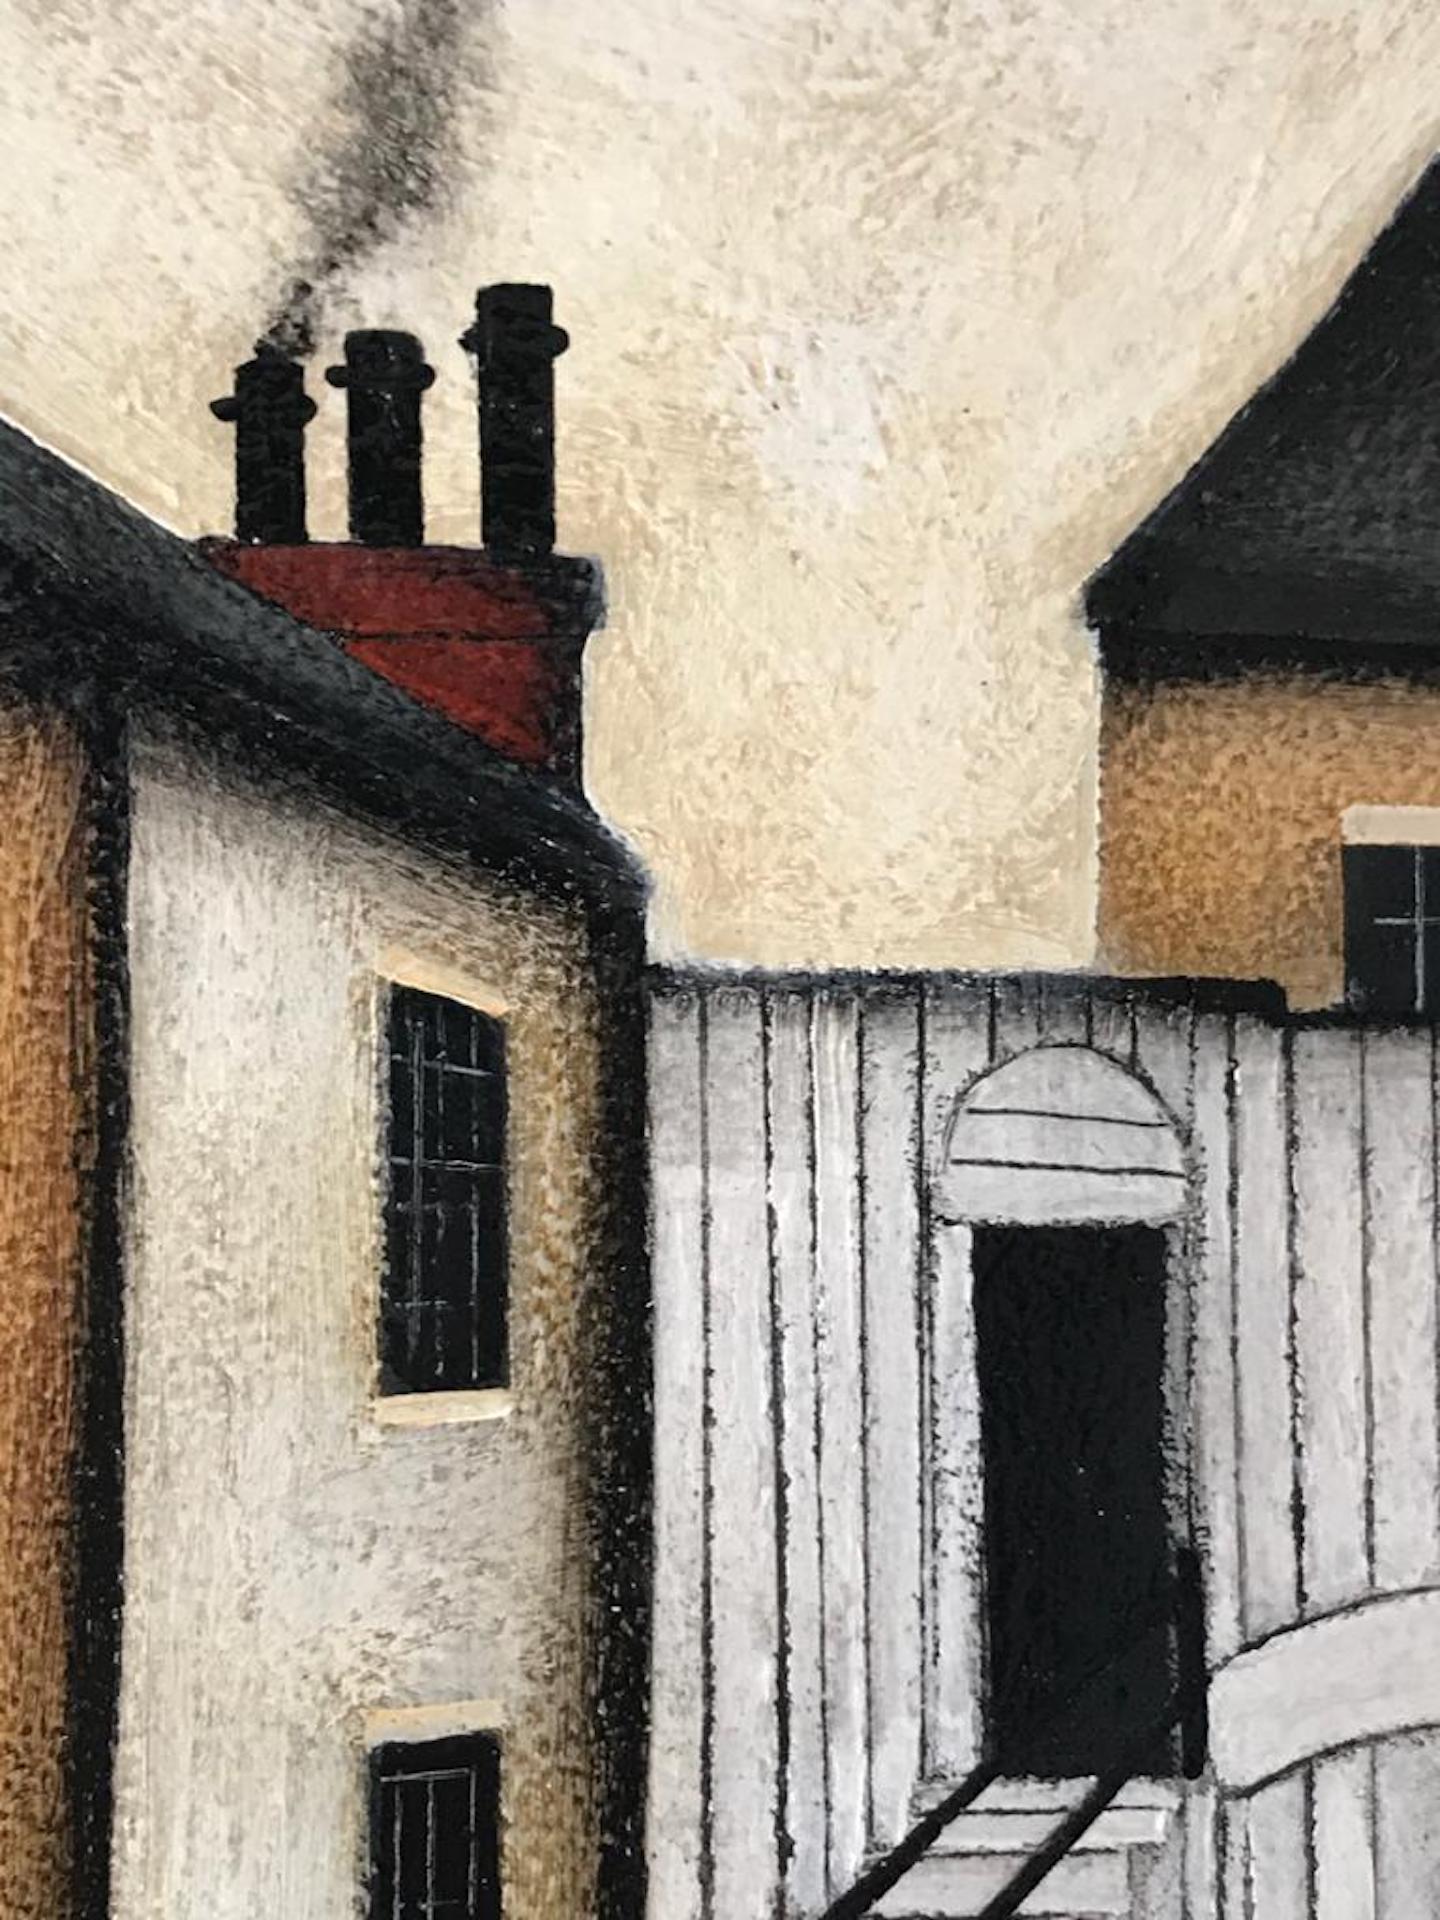 Sean Durkin, Village Life, Contemporary Painting in the Style of Lowry 3